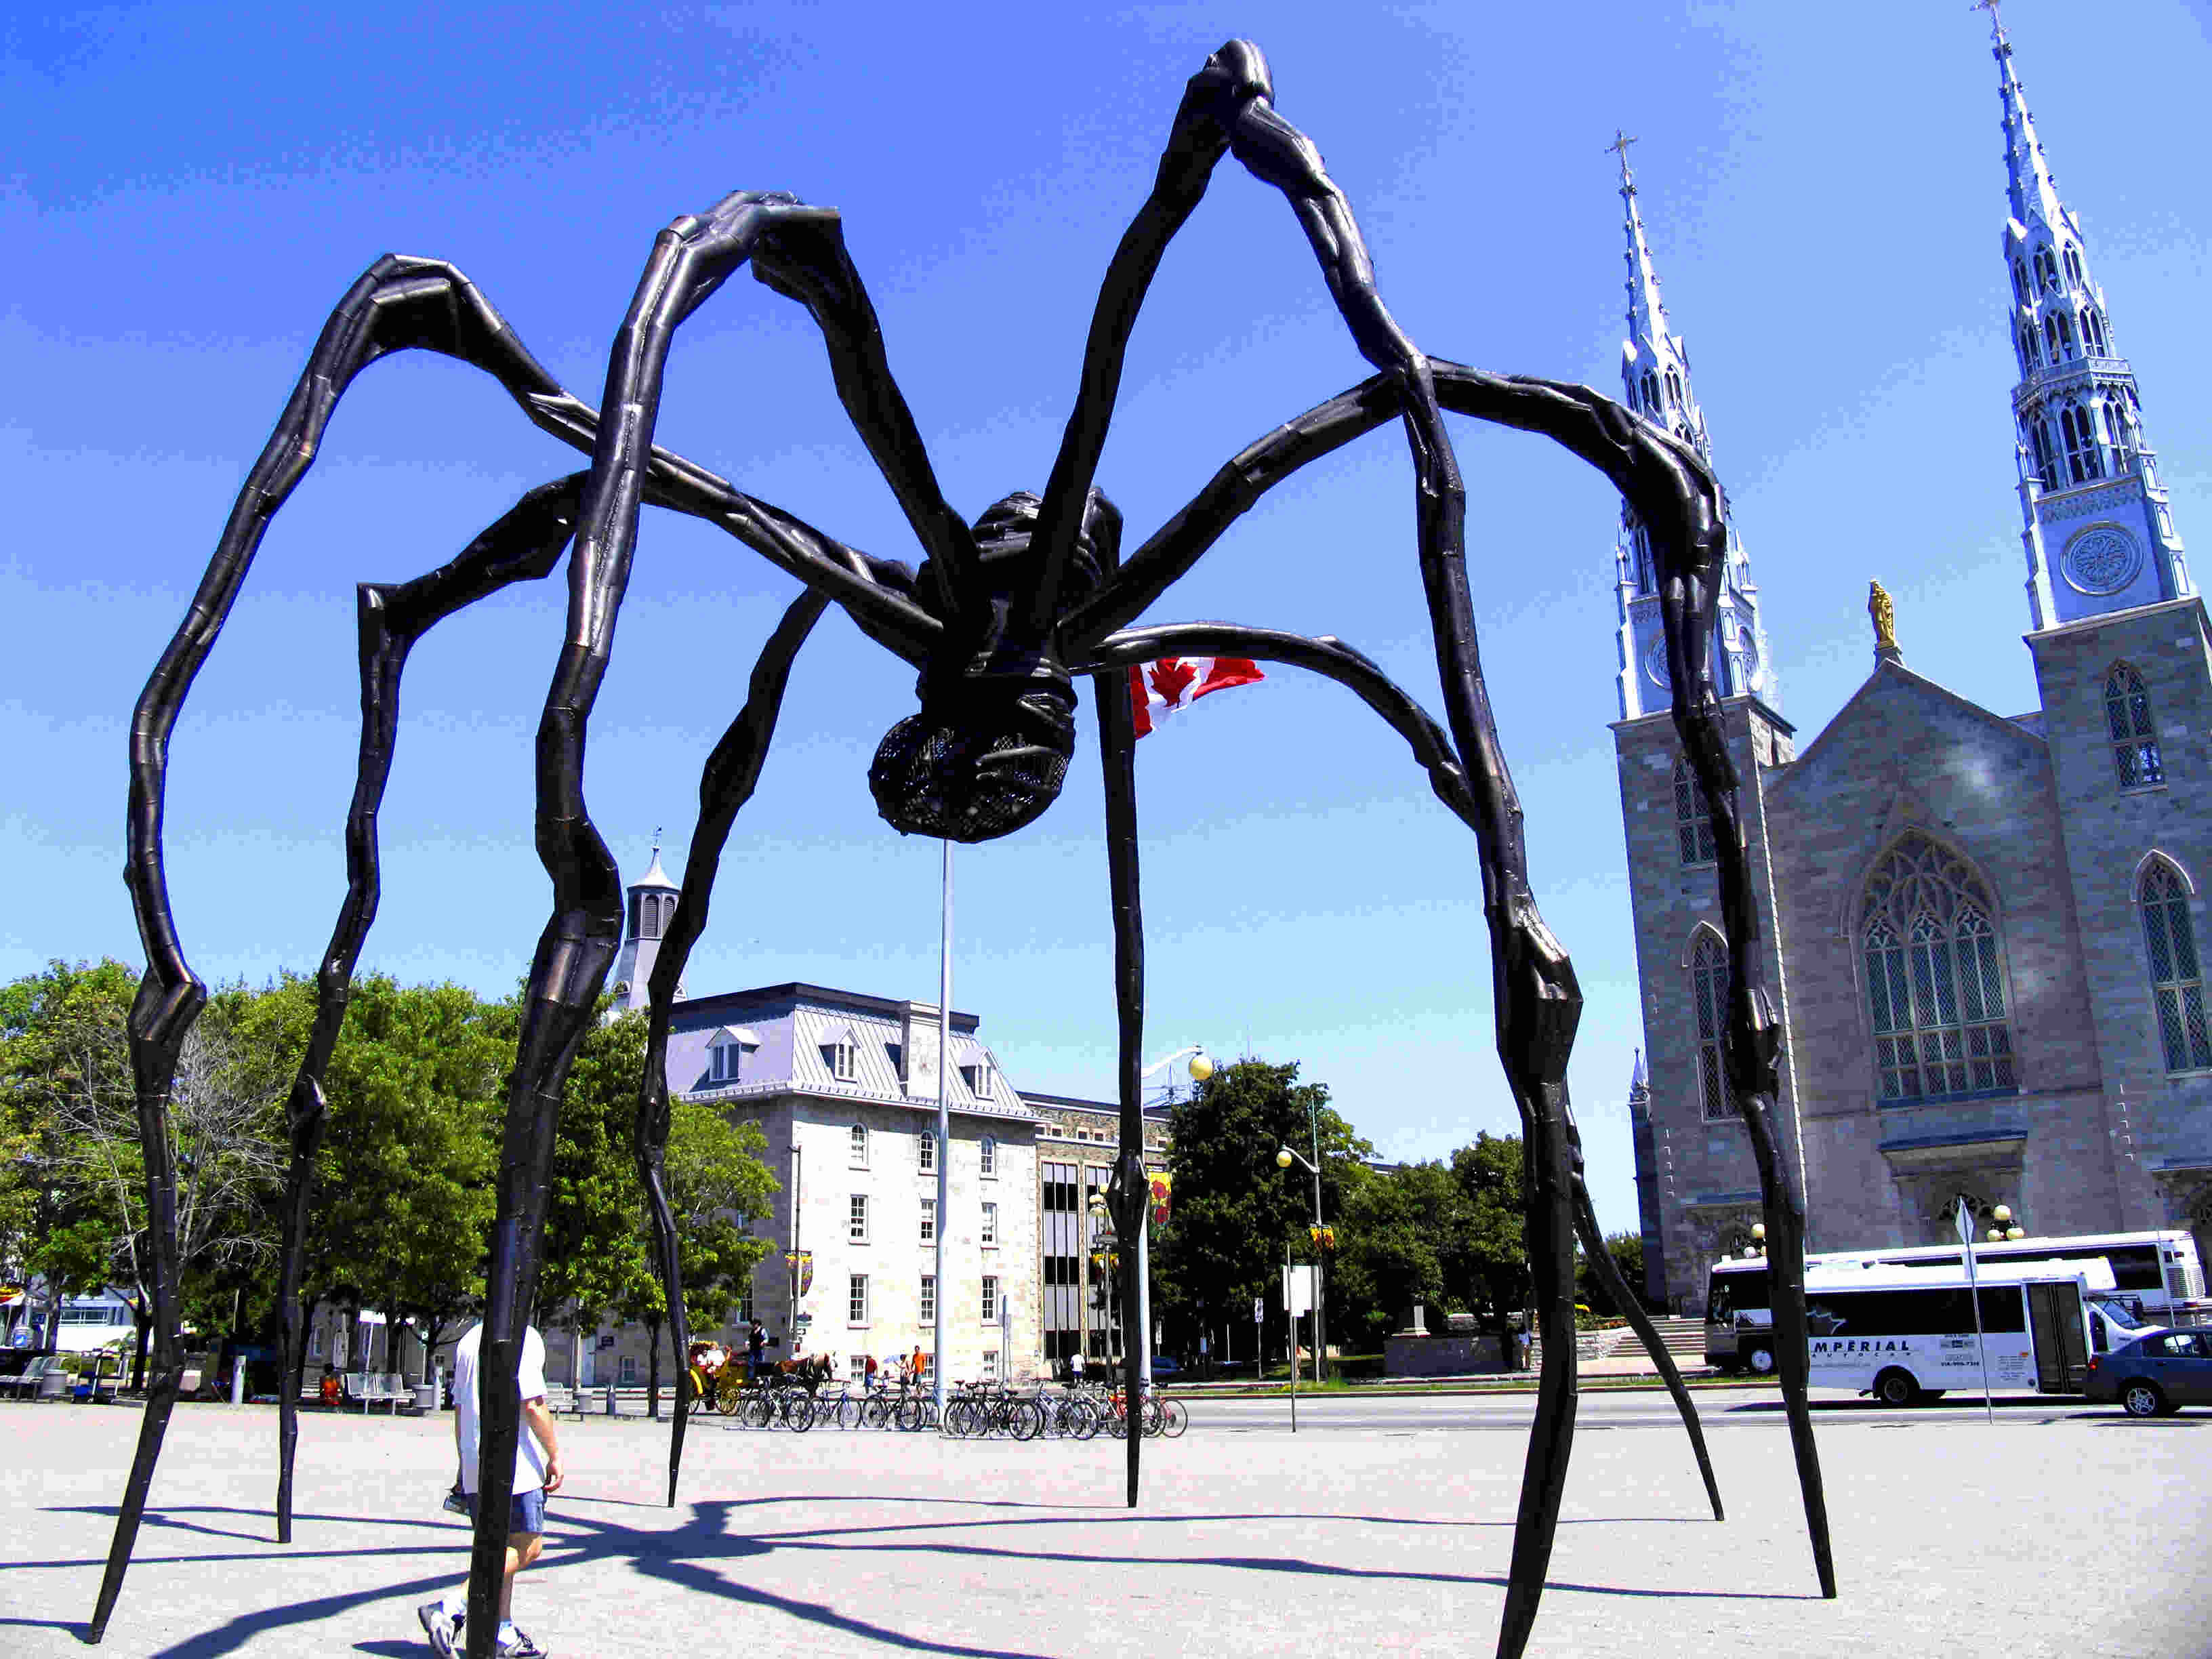 Where Is The Maman Sculpture Located